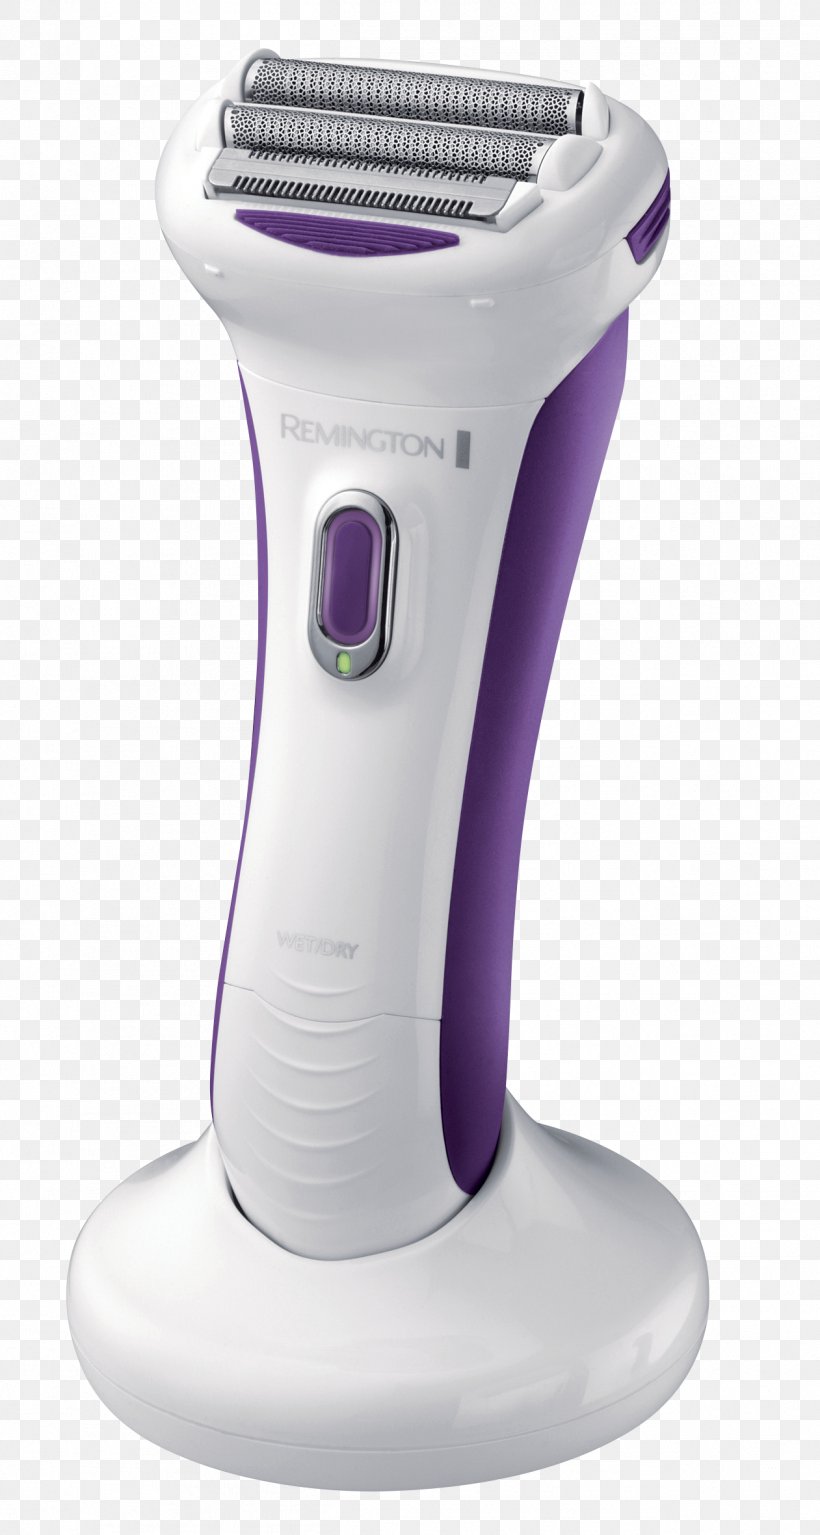 Electric Razors & Hair Trimmers Ladyshave Remington Smooth & Silky WDF5030 Shaving Remington WDF4840, PNG, 1261x2362px, Electric Razors Hair Trimmers, Electricity, Epilator, Hair Removal, Ladyshave Download Free